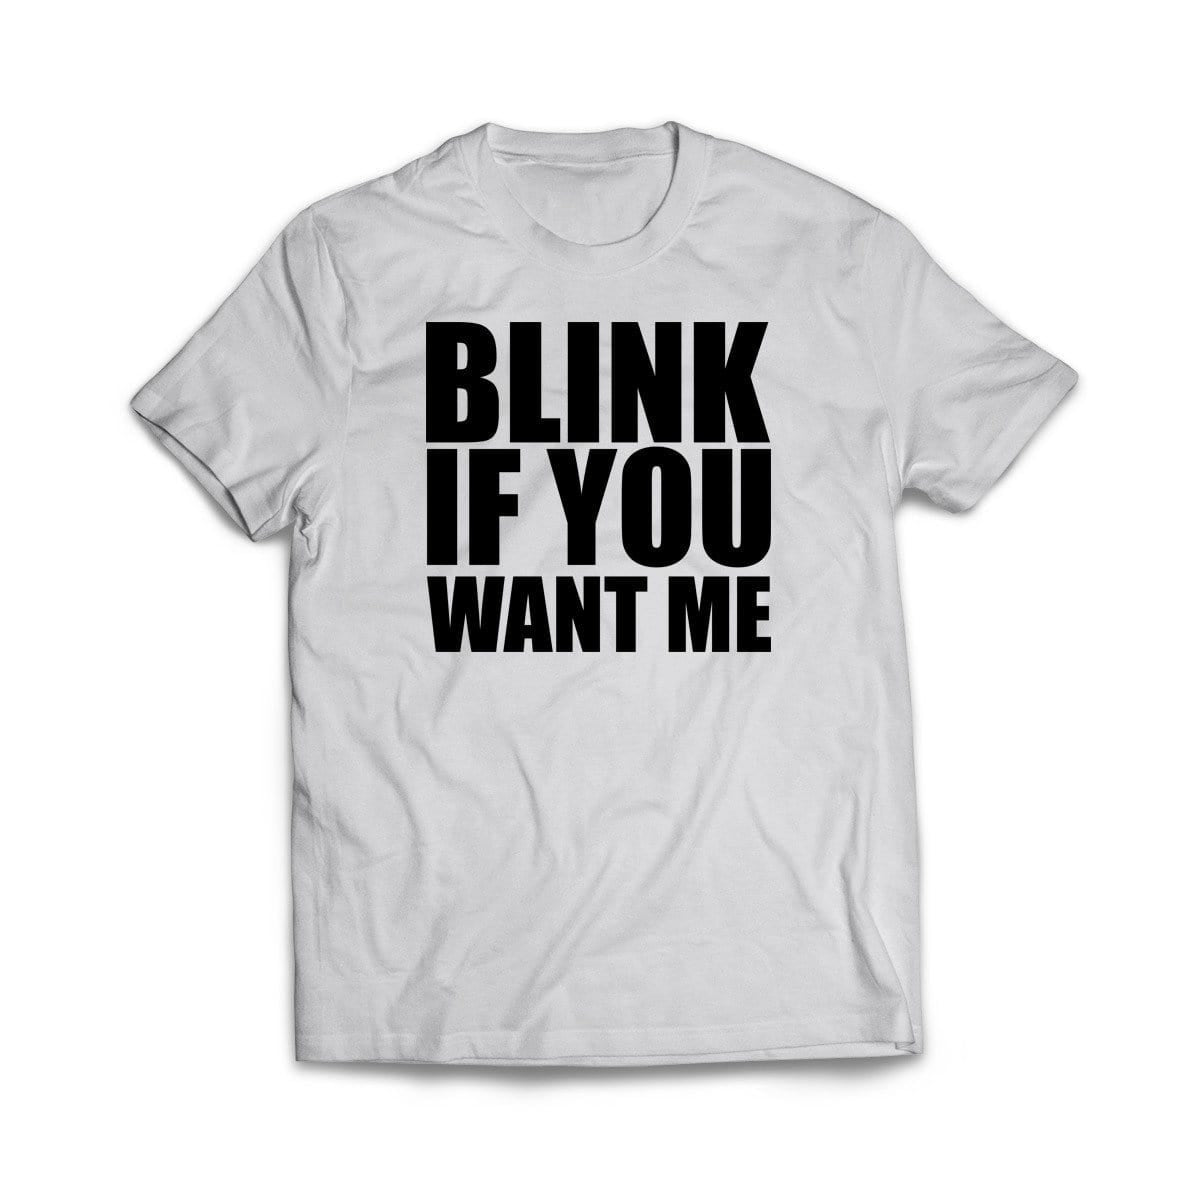 Blink If You Want Me White T-Shirt - We Got Teez